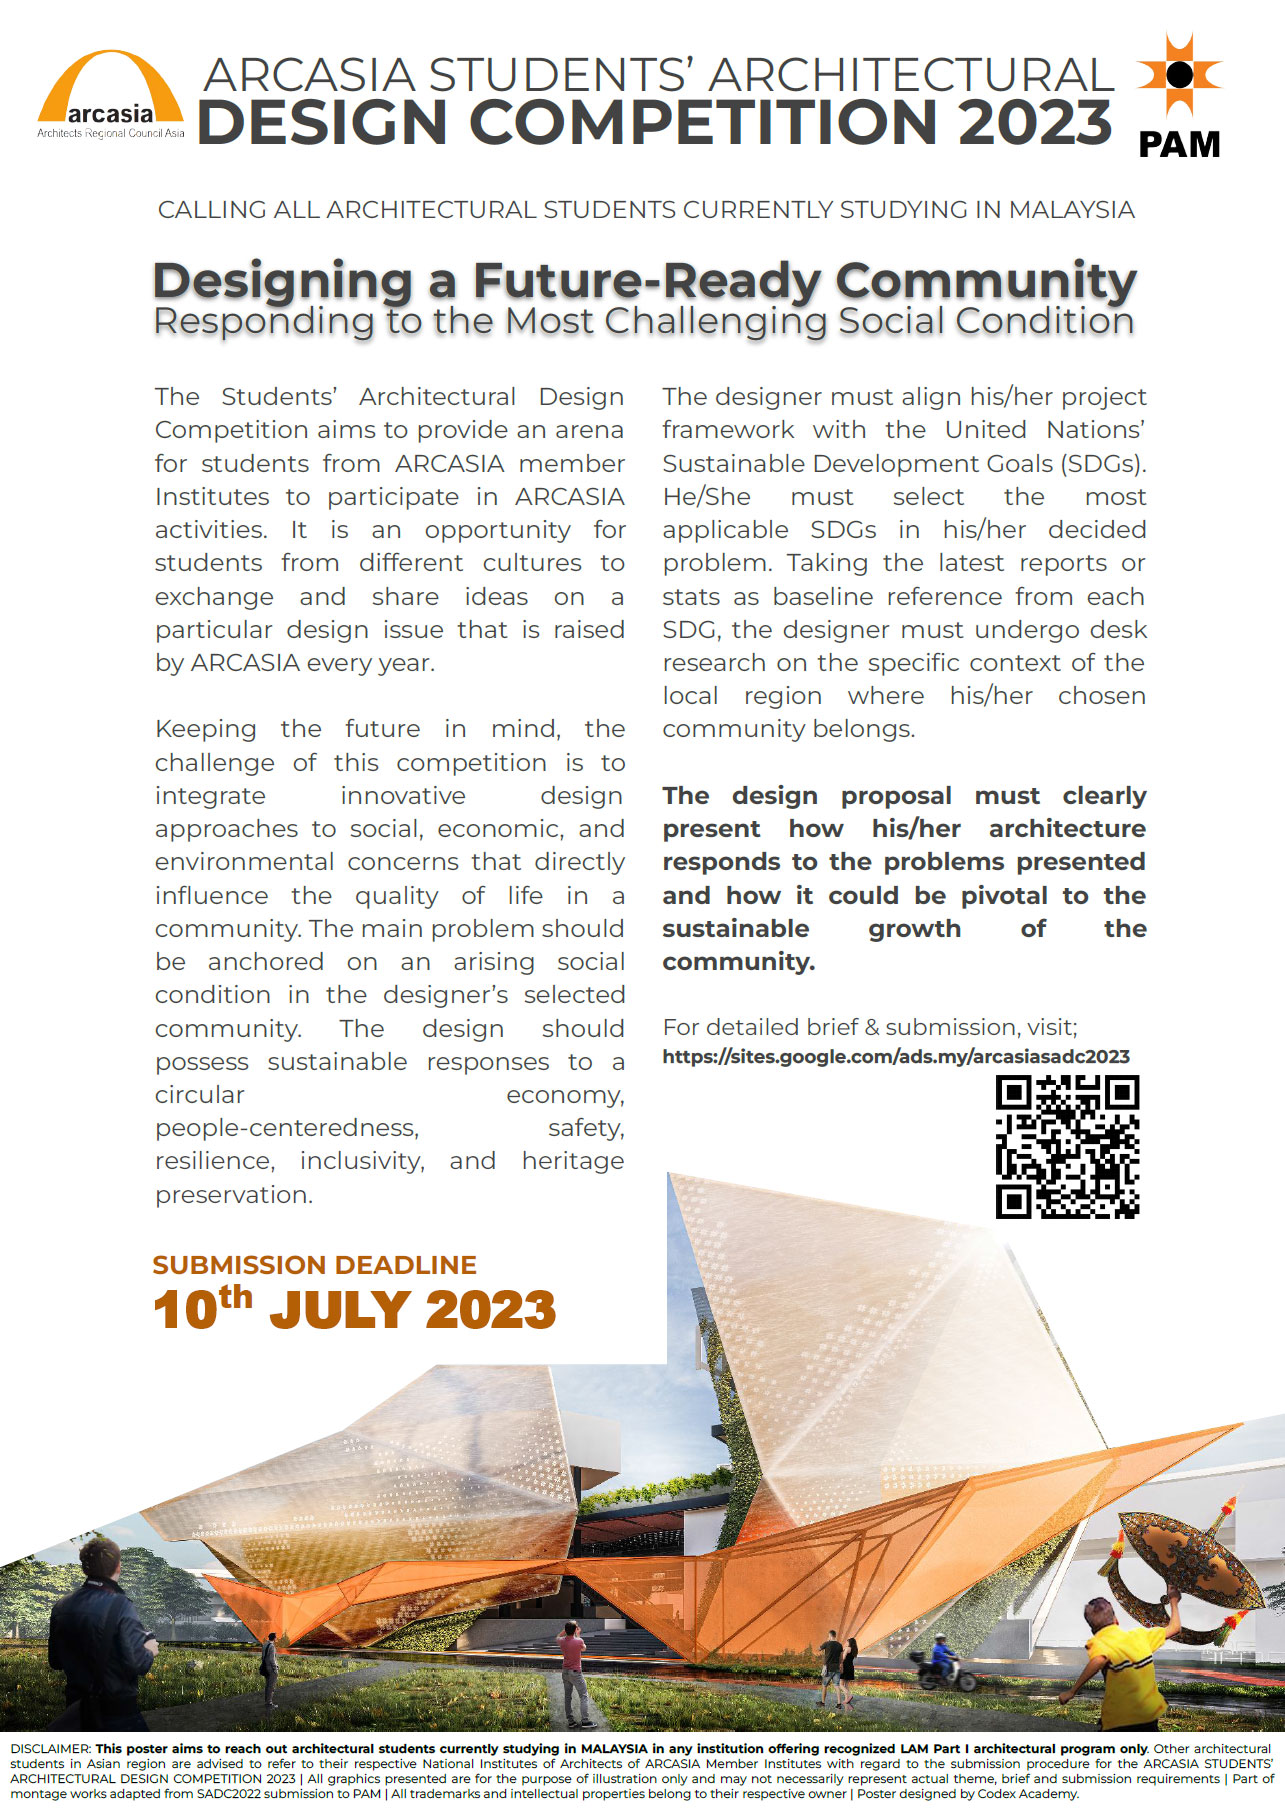 ARCASIA Students Architectural Design Competition 2023 (SADC 2023)